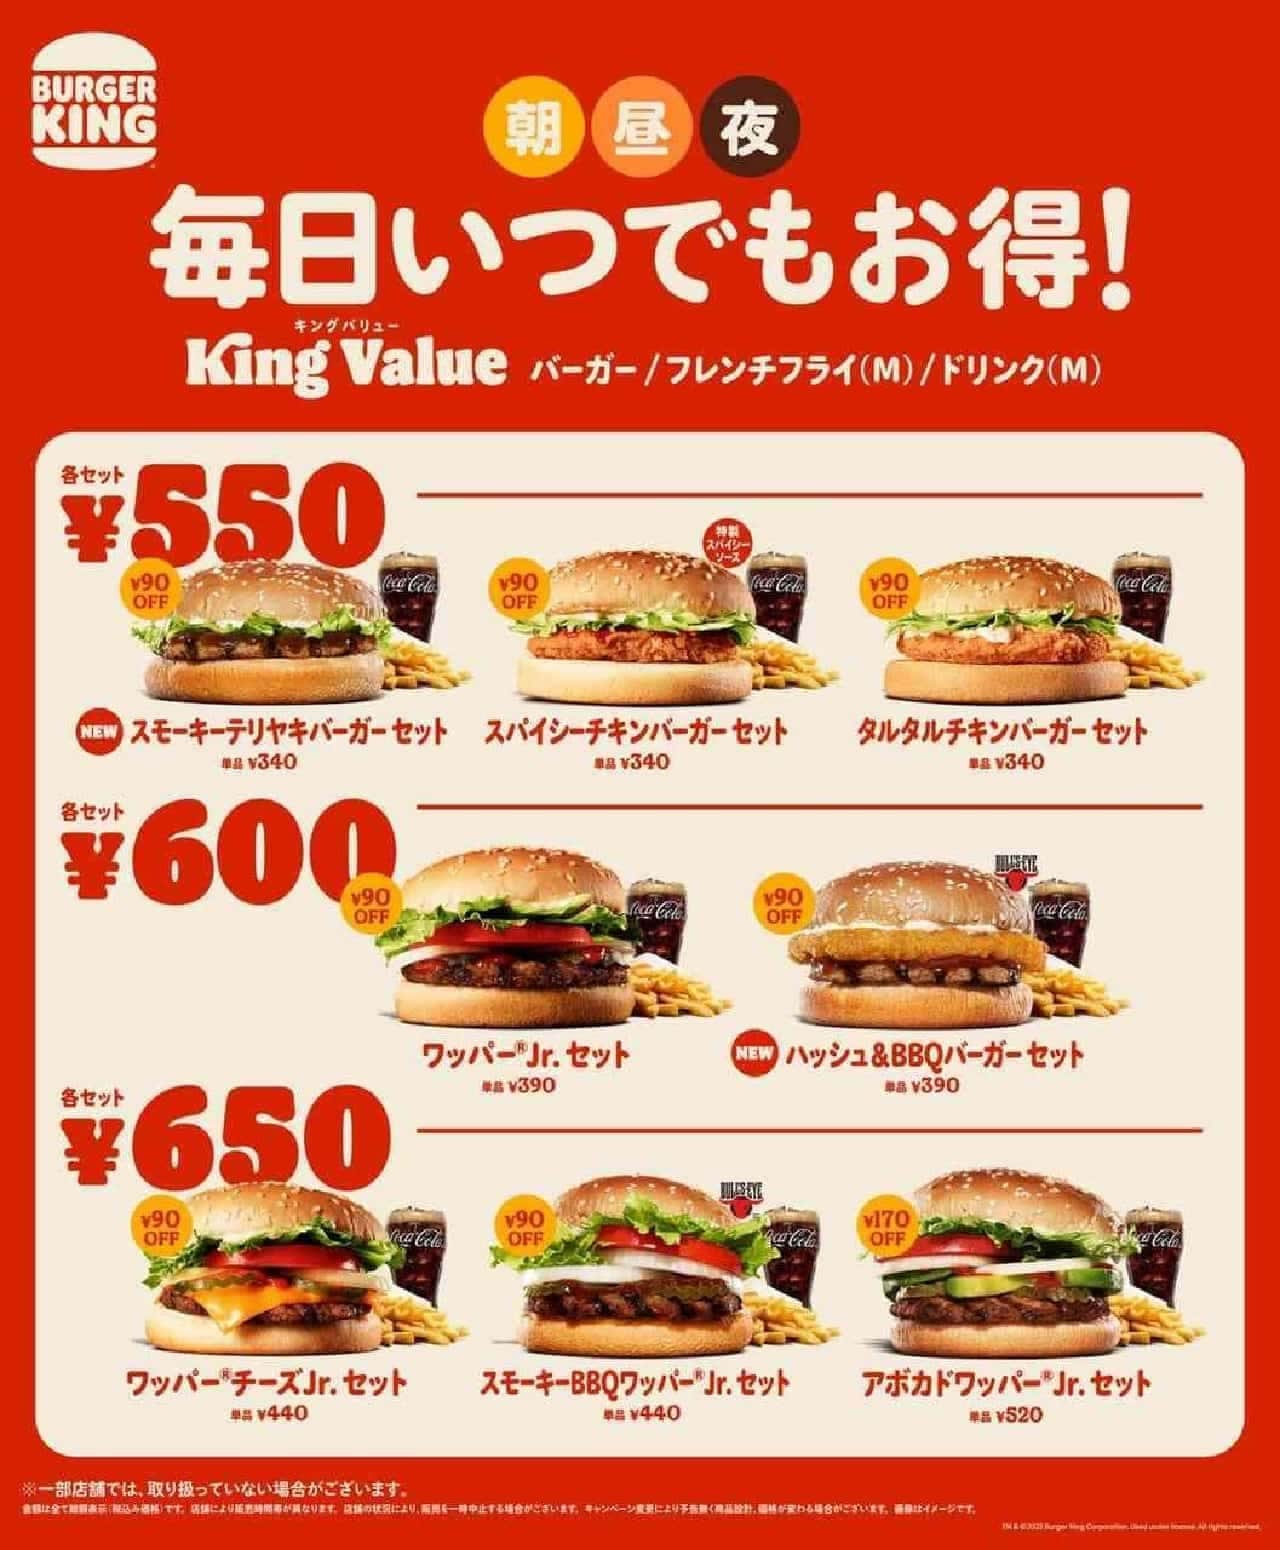 Burger King - King Value for your money!